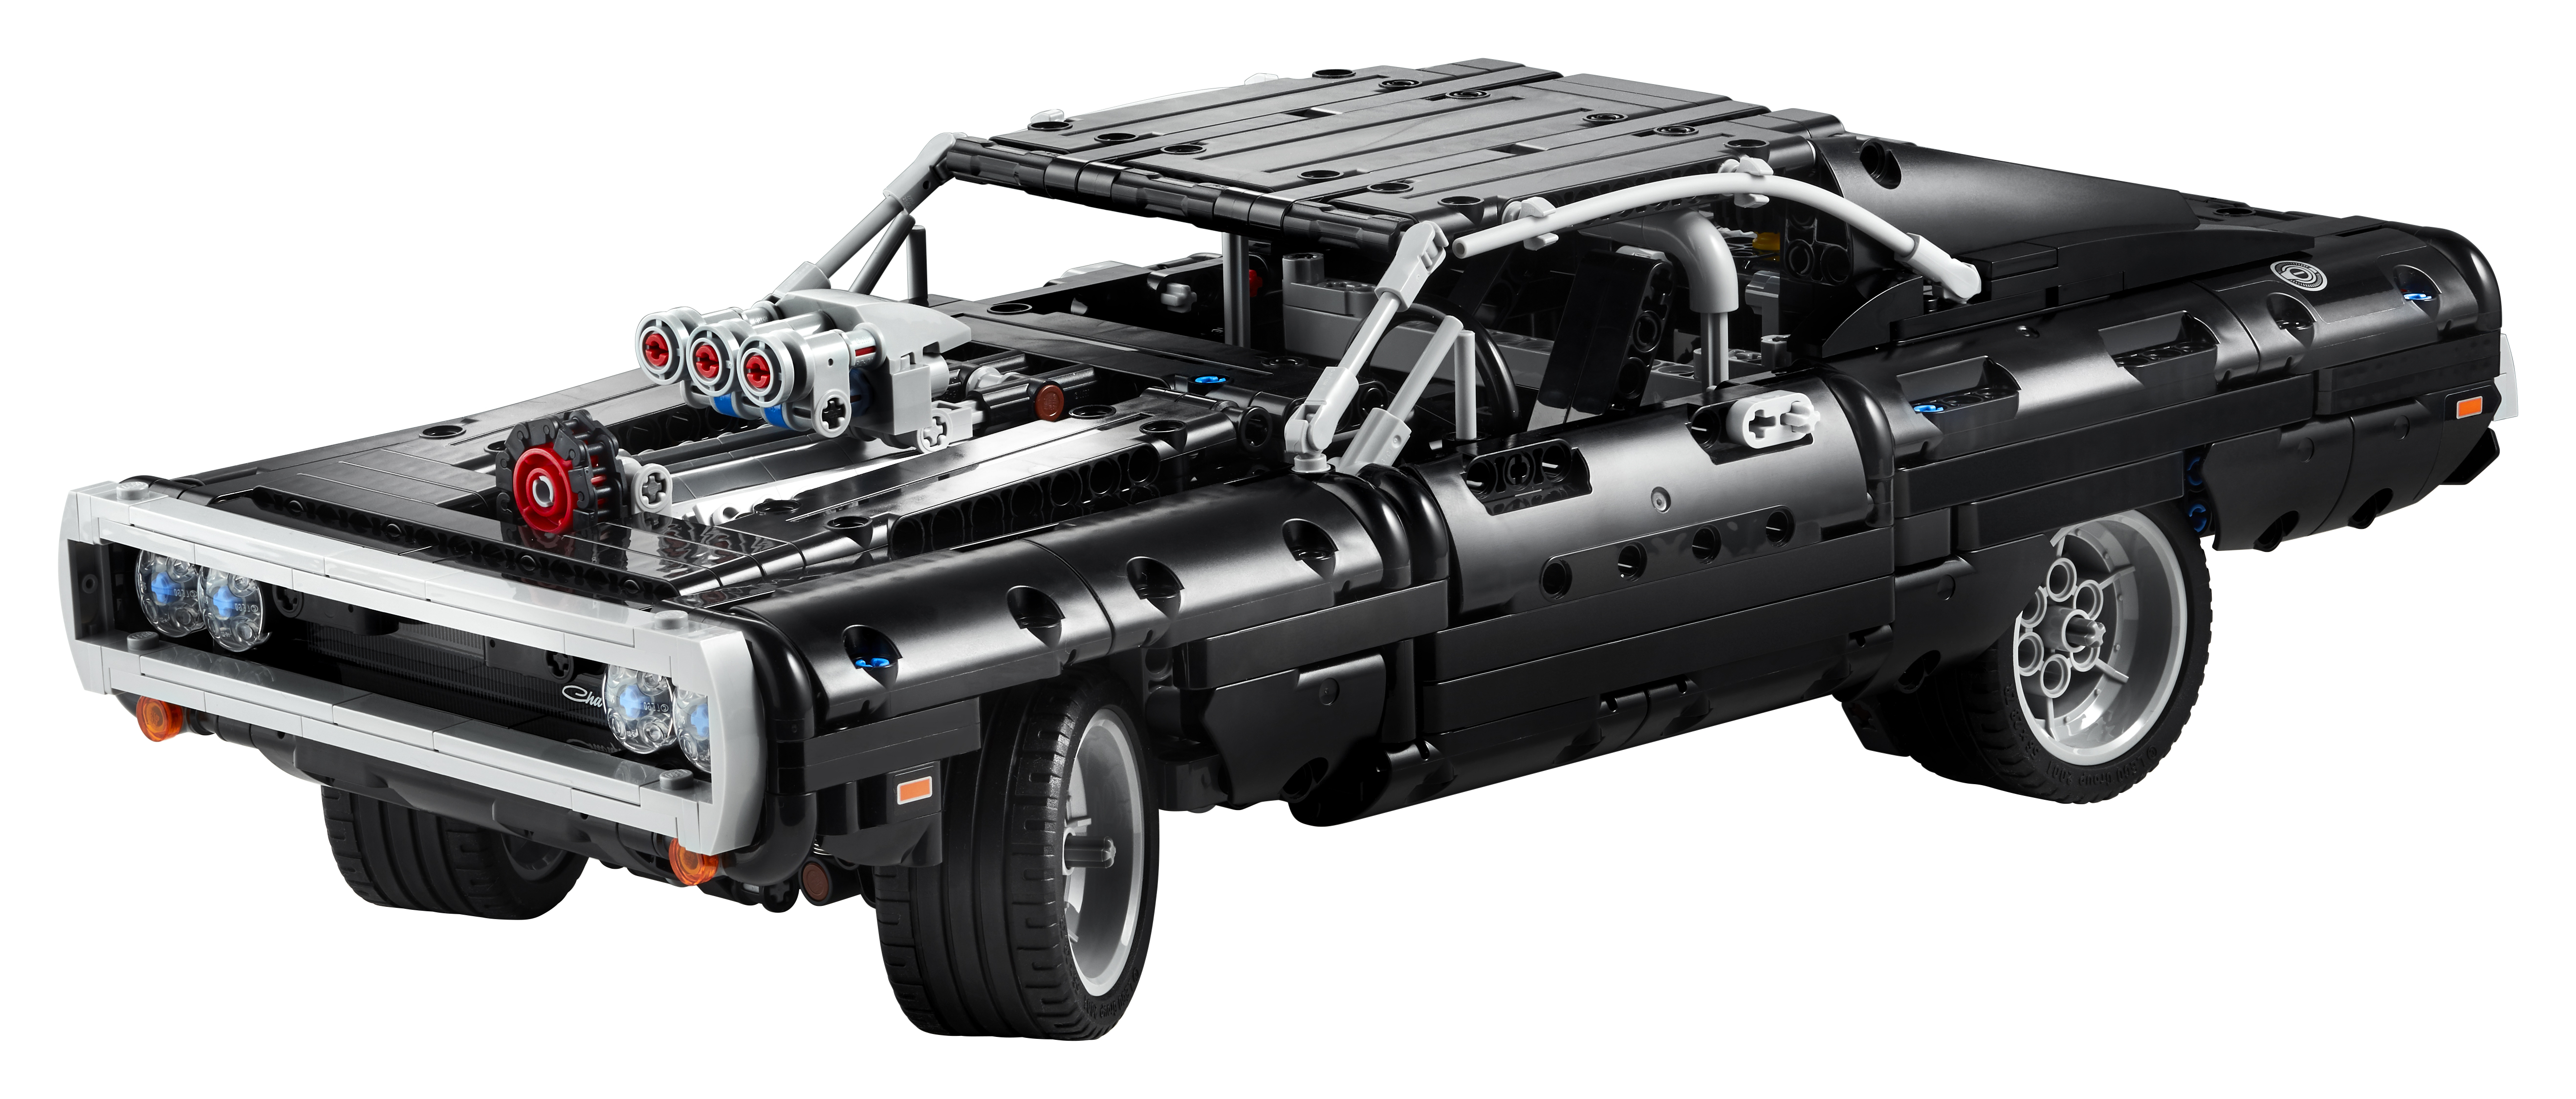  Technic Doms Dodge Charger - 42111